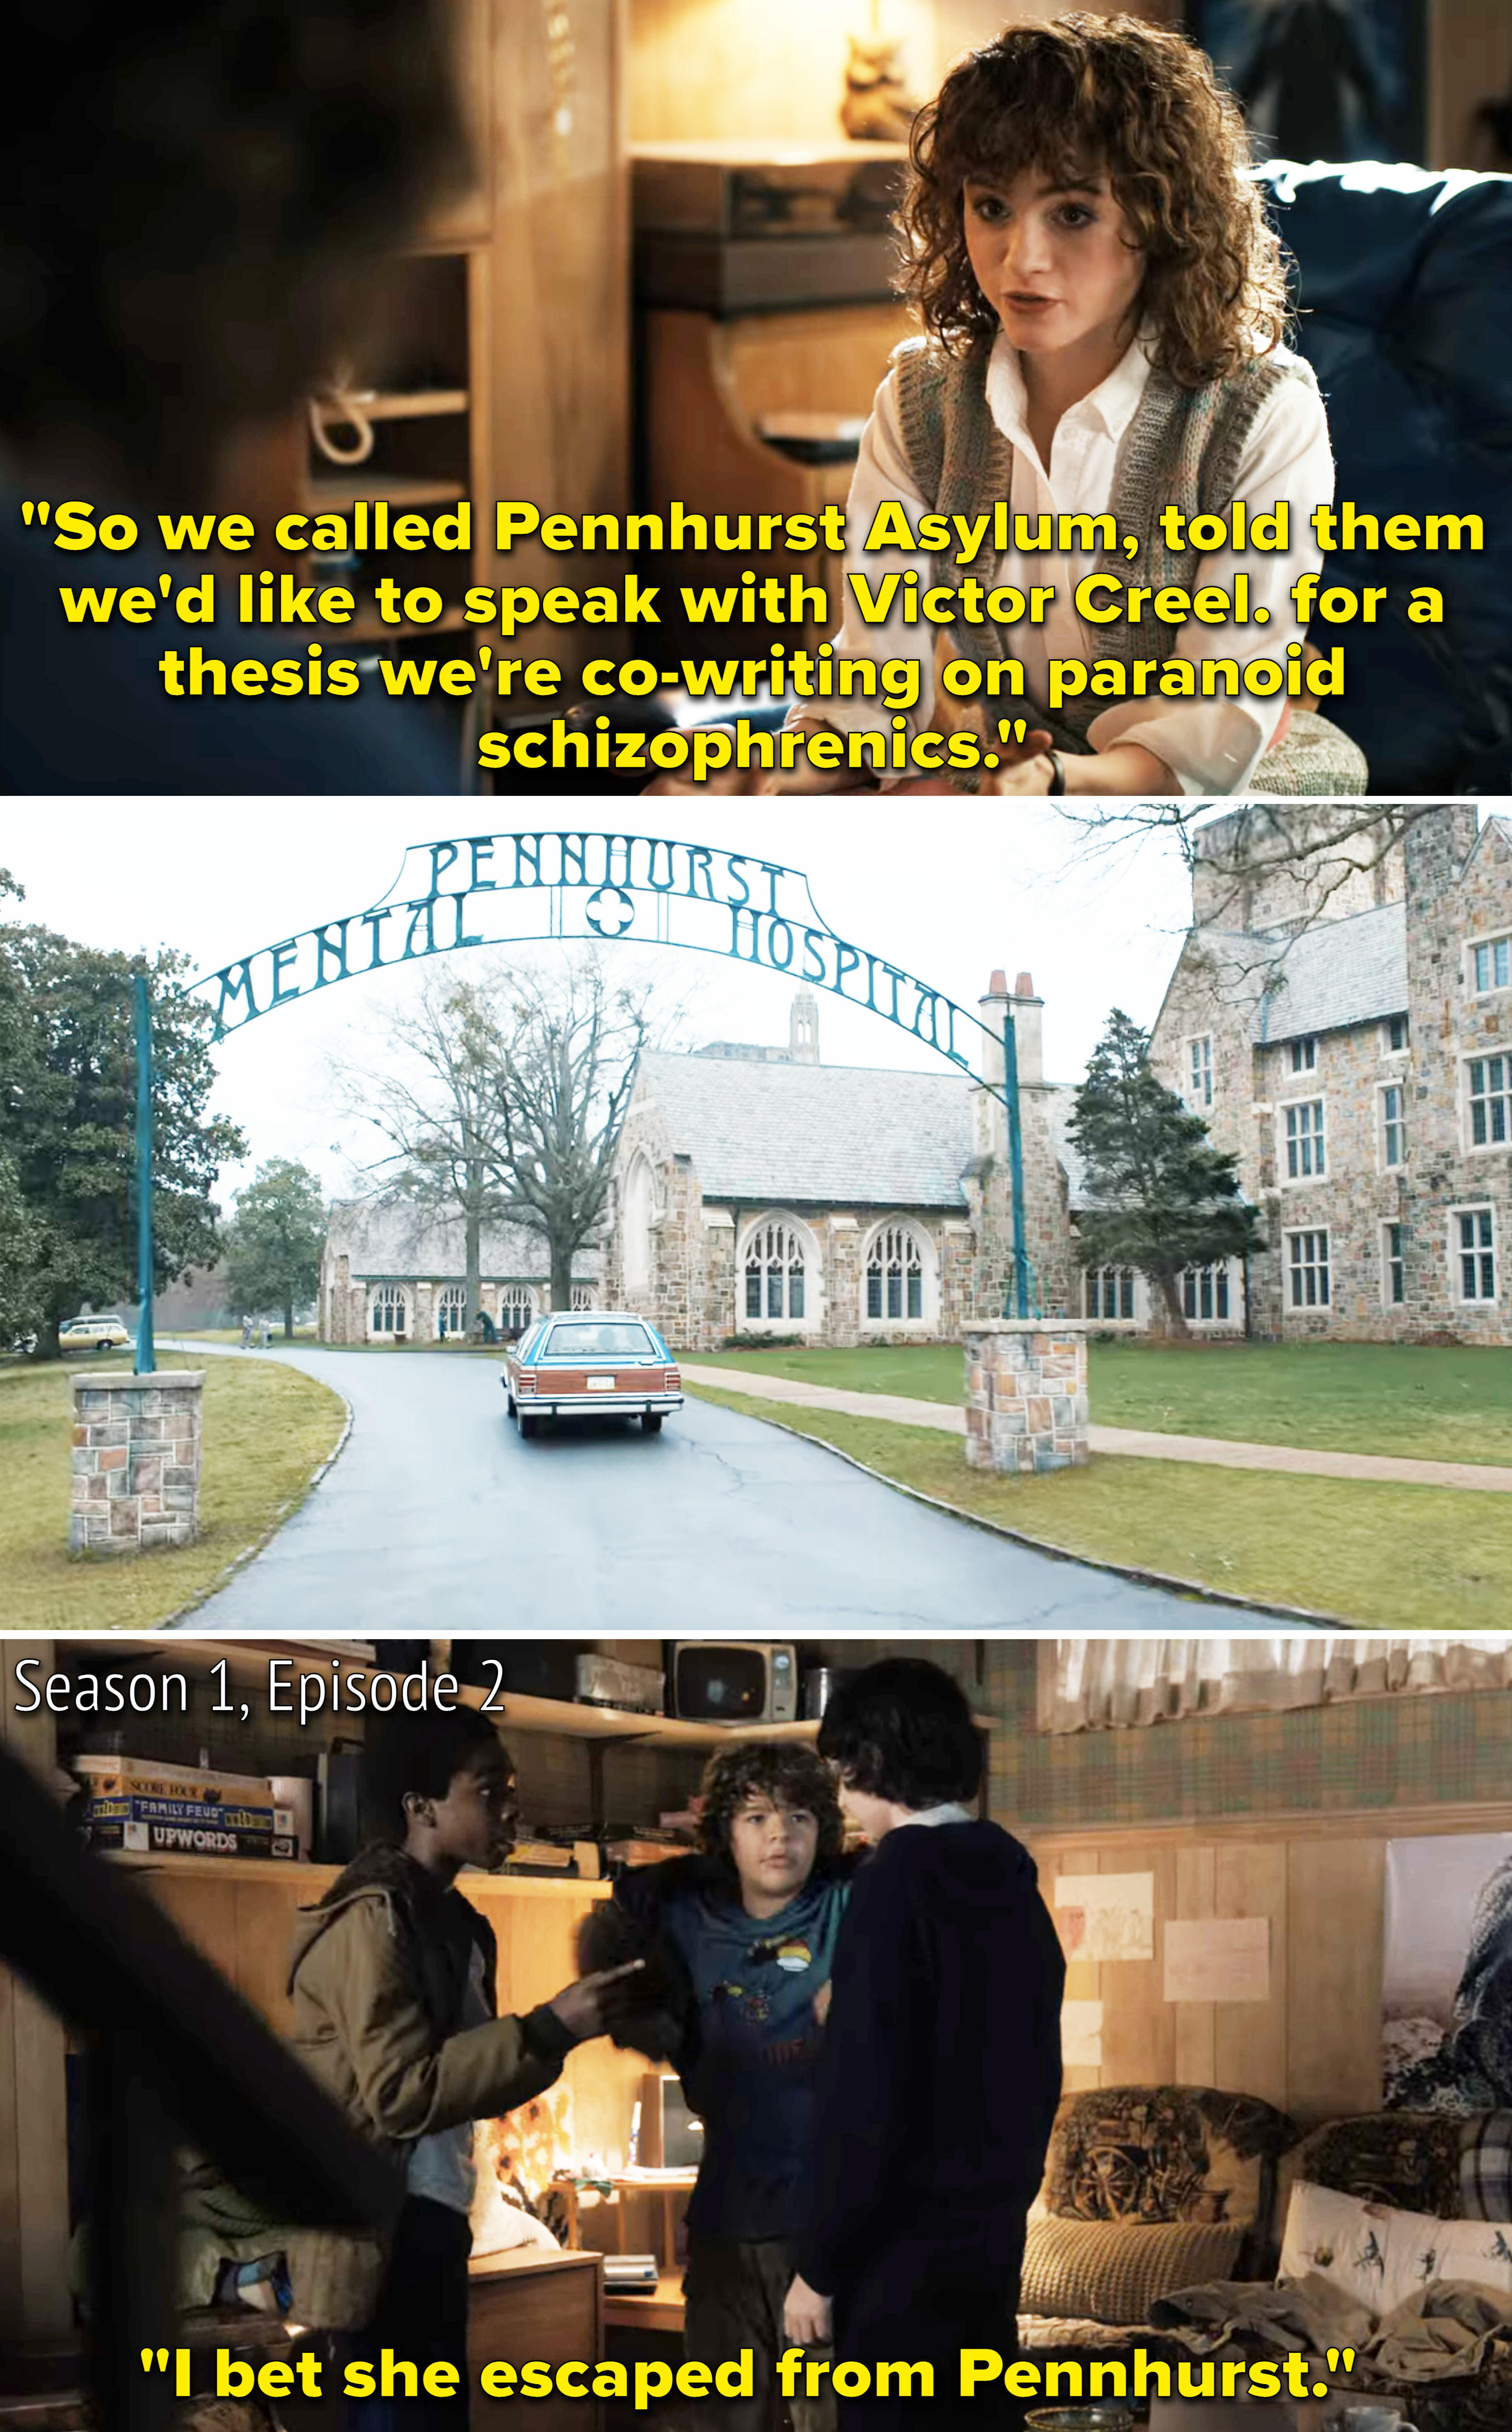 Nancy talking about the mental hospital; the entrance to the hospital; Lucas, Dustin, and Mike talking about Pennhurst